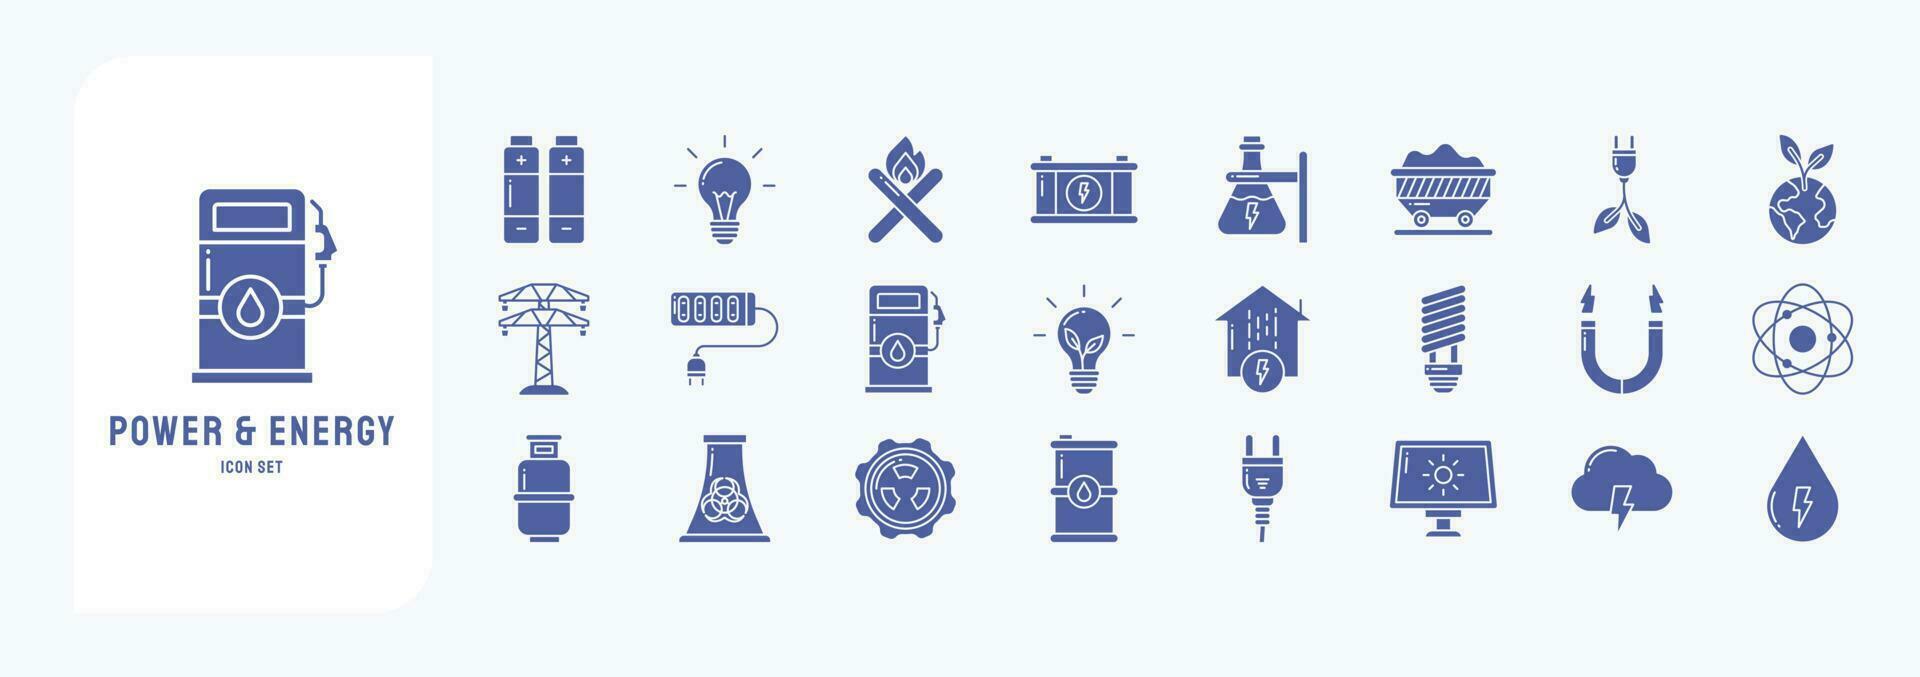 Collection of icons related to Power and Energy, including icons like Battery, Bulb, electric power, Ecology and more vector